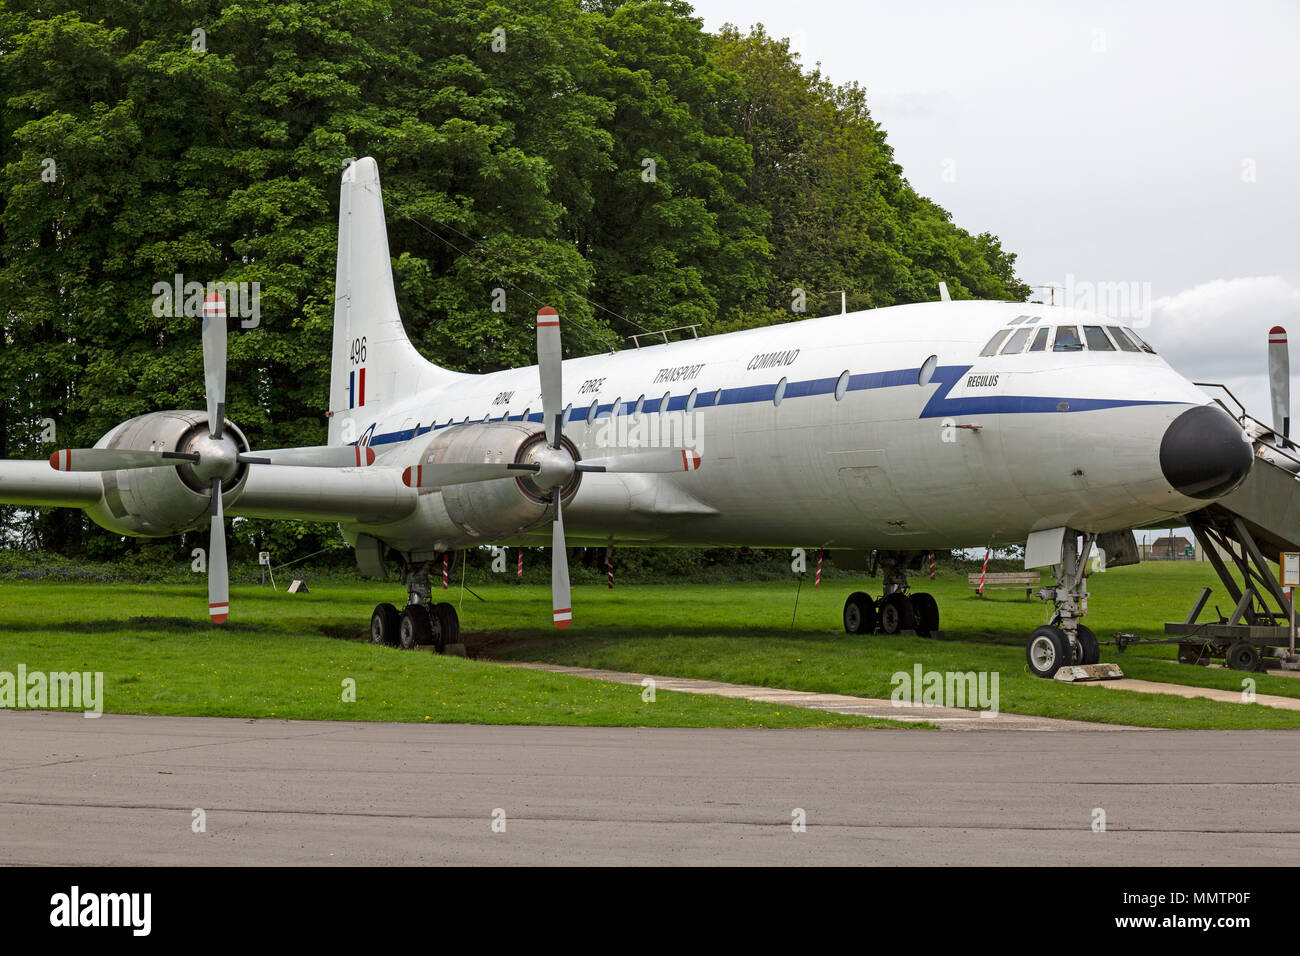 Bristol Britannia C.1, XM496, of Royal Air Force Transport Command, preserved at Cotswold Kemble Airfield in England, a former Royal Air Force base. Stock Photo